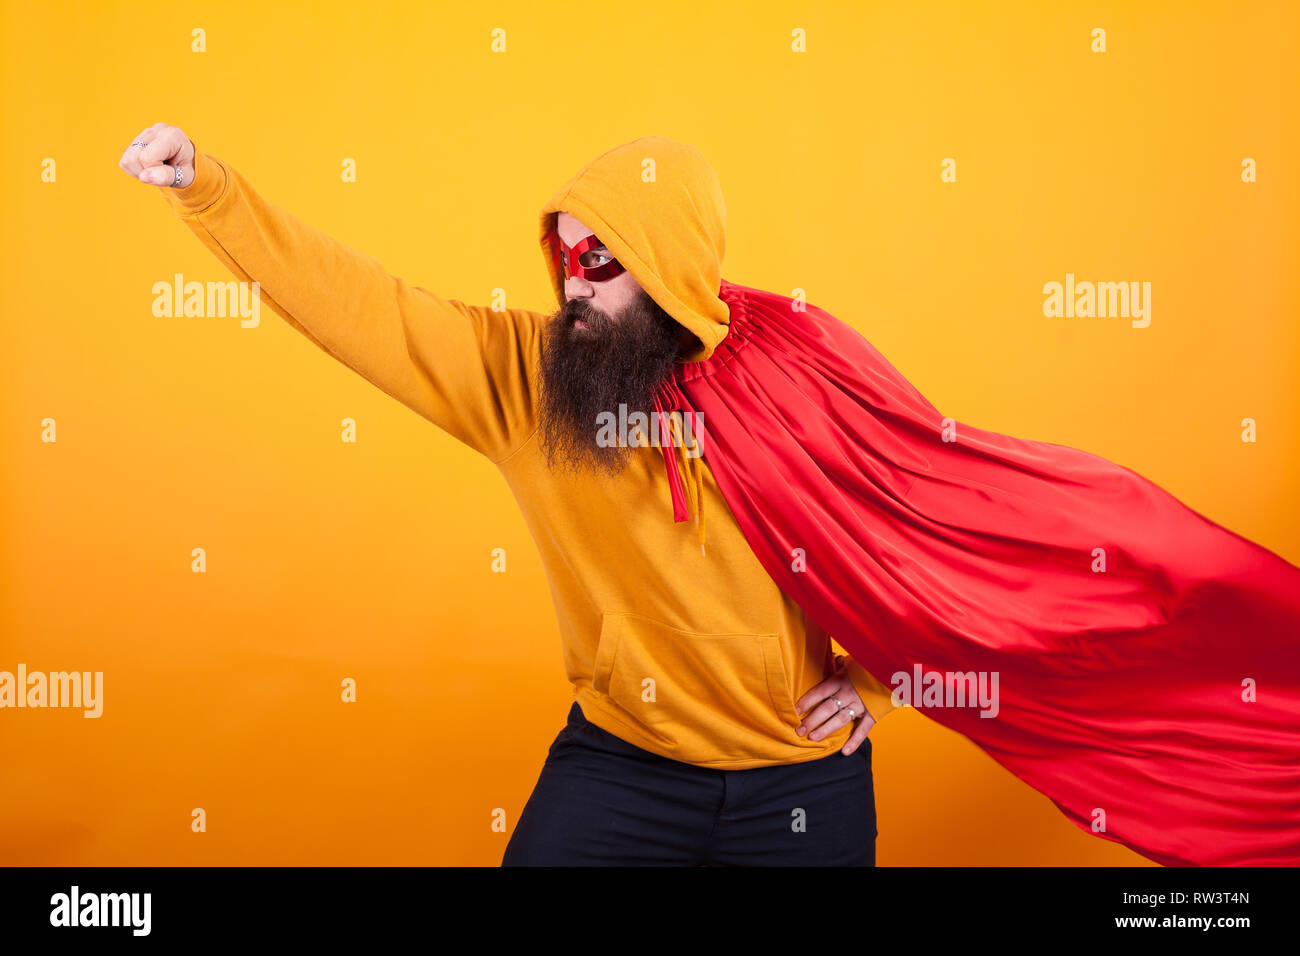 Superhero with red cape and mask flying away in studio over yellow background., Brave man. Handsome. Stock Photo